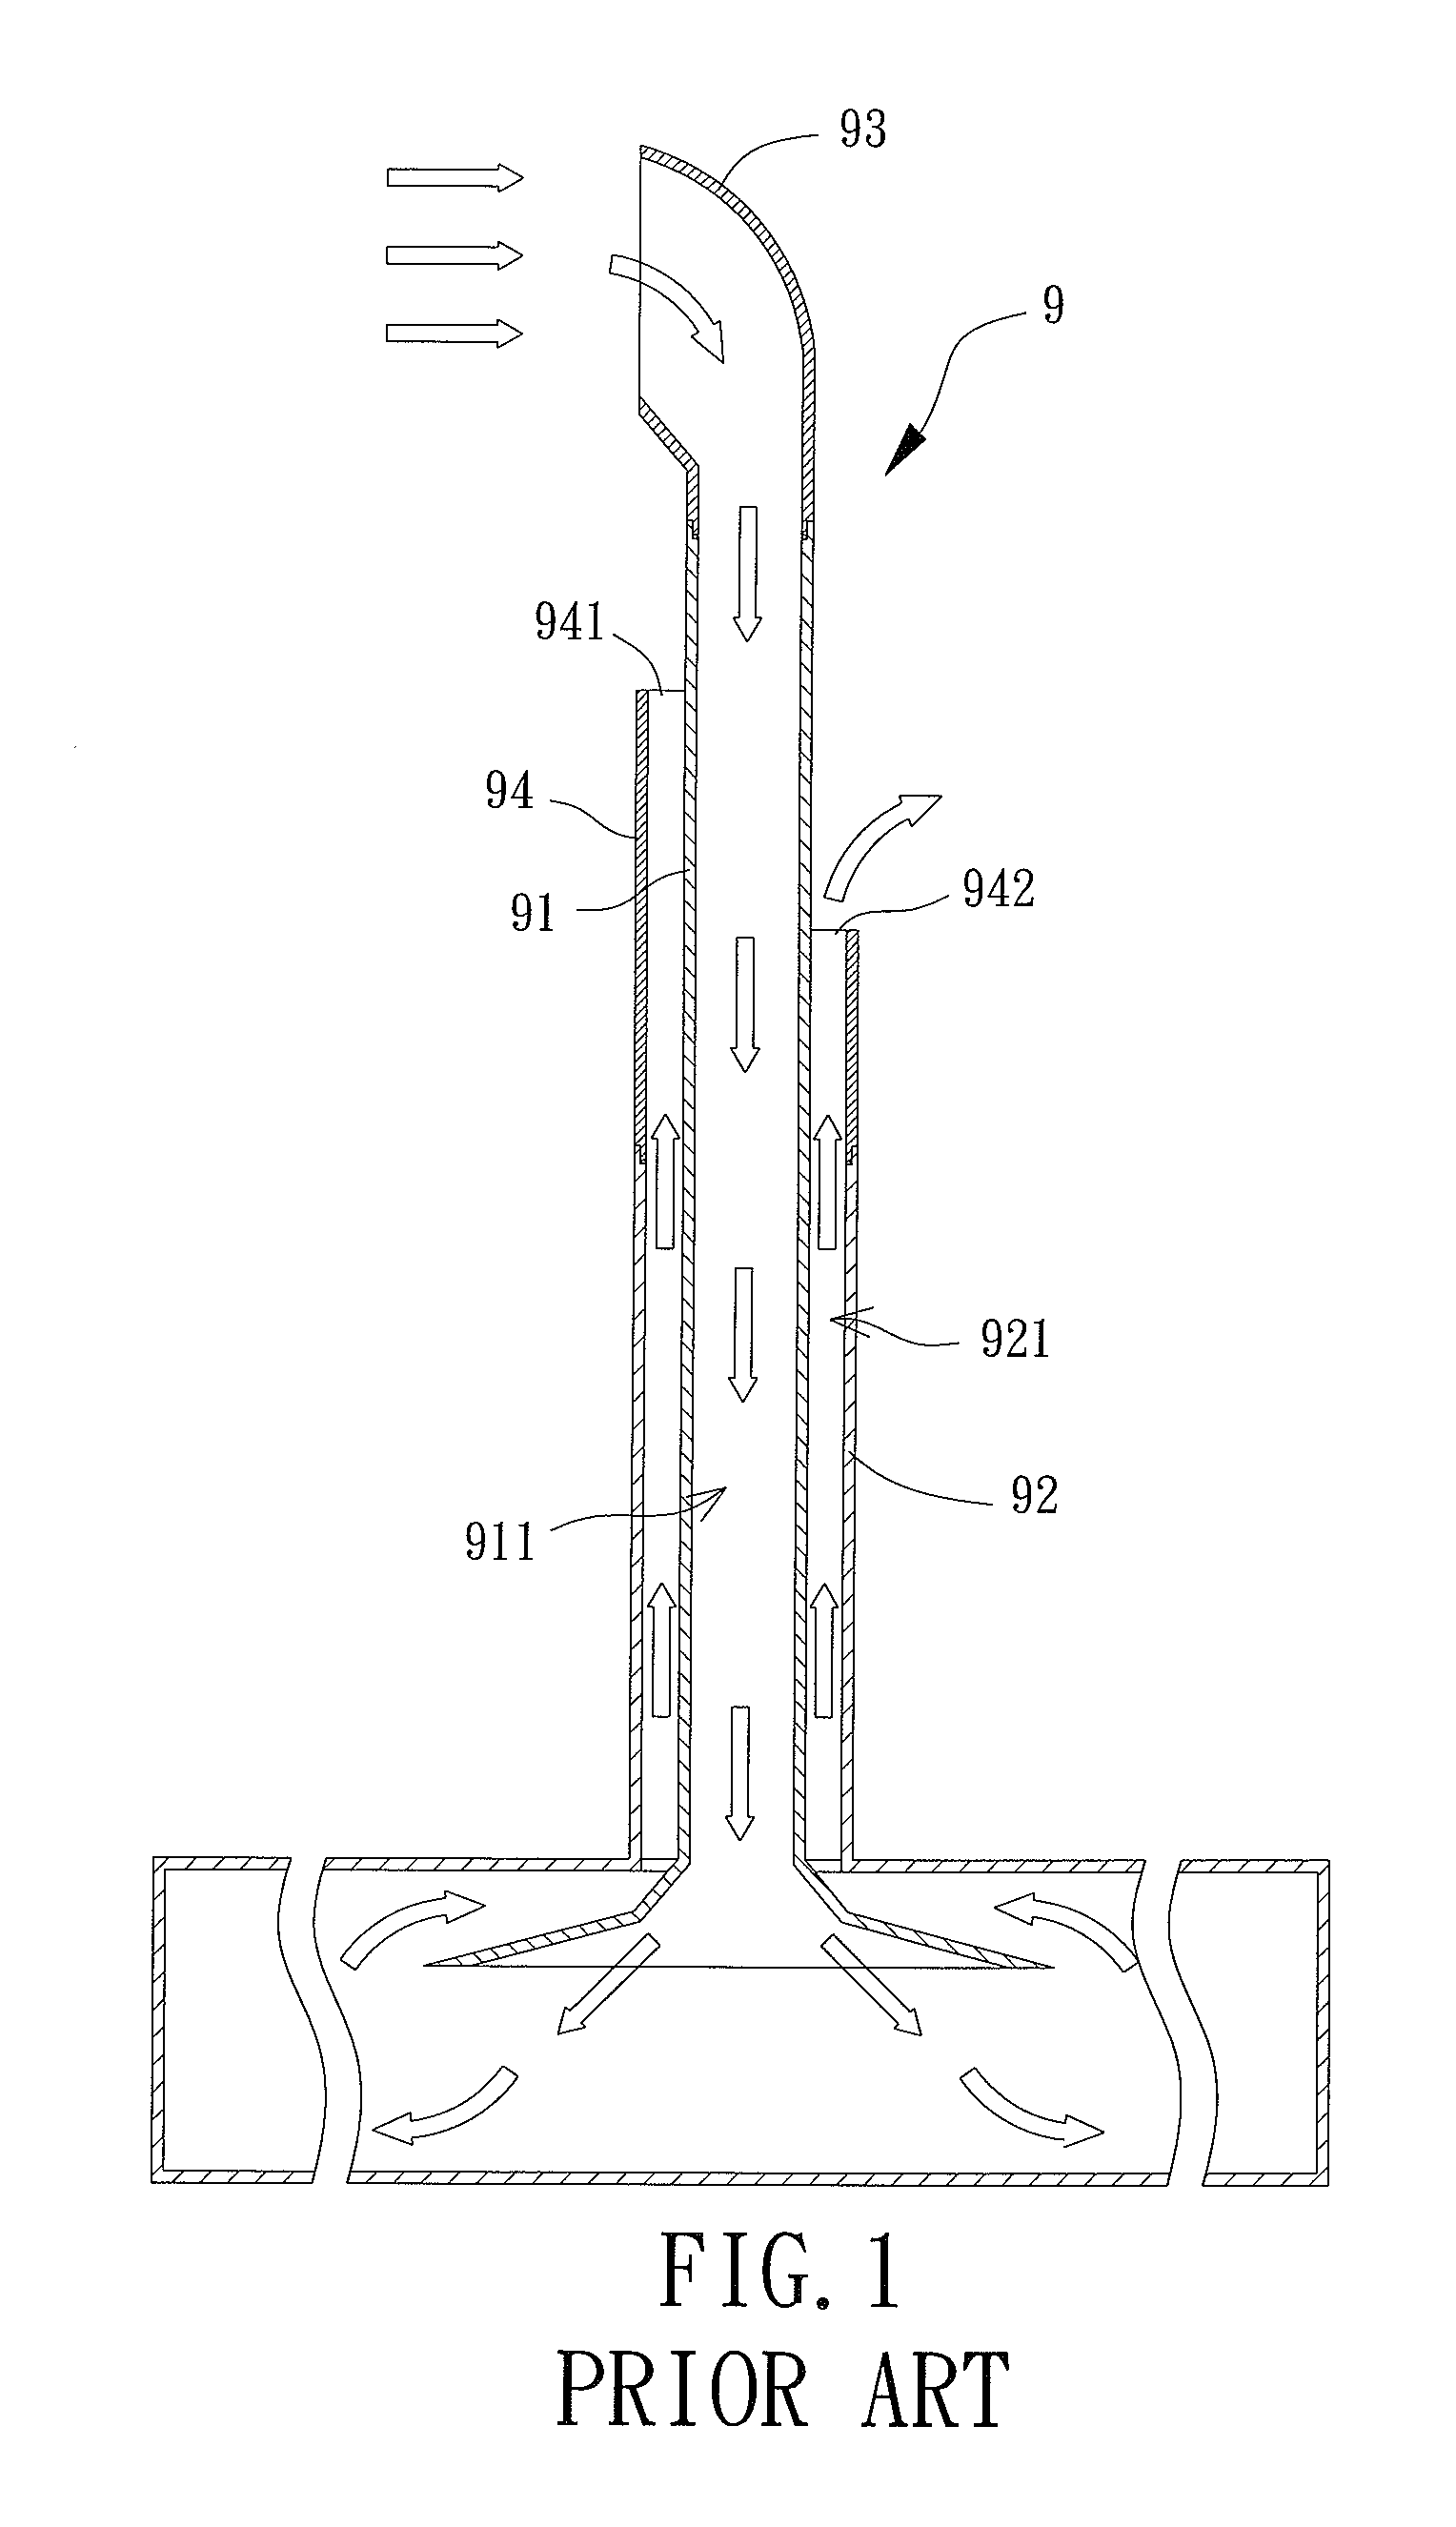 Ventilation system with controllable air input and output